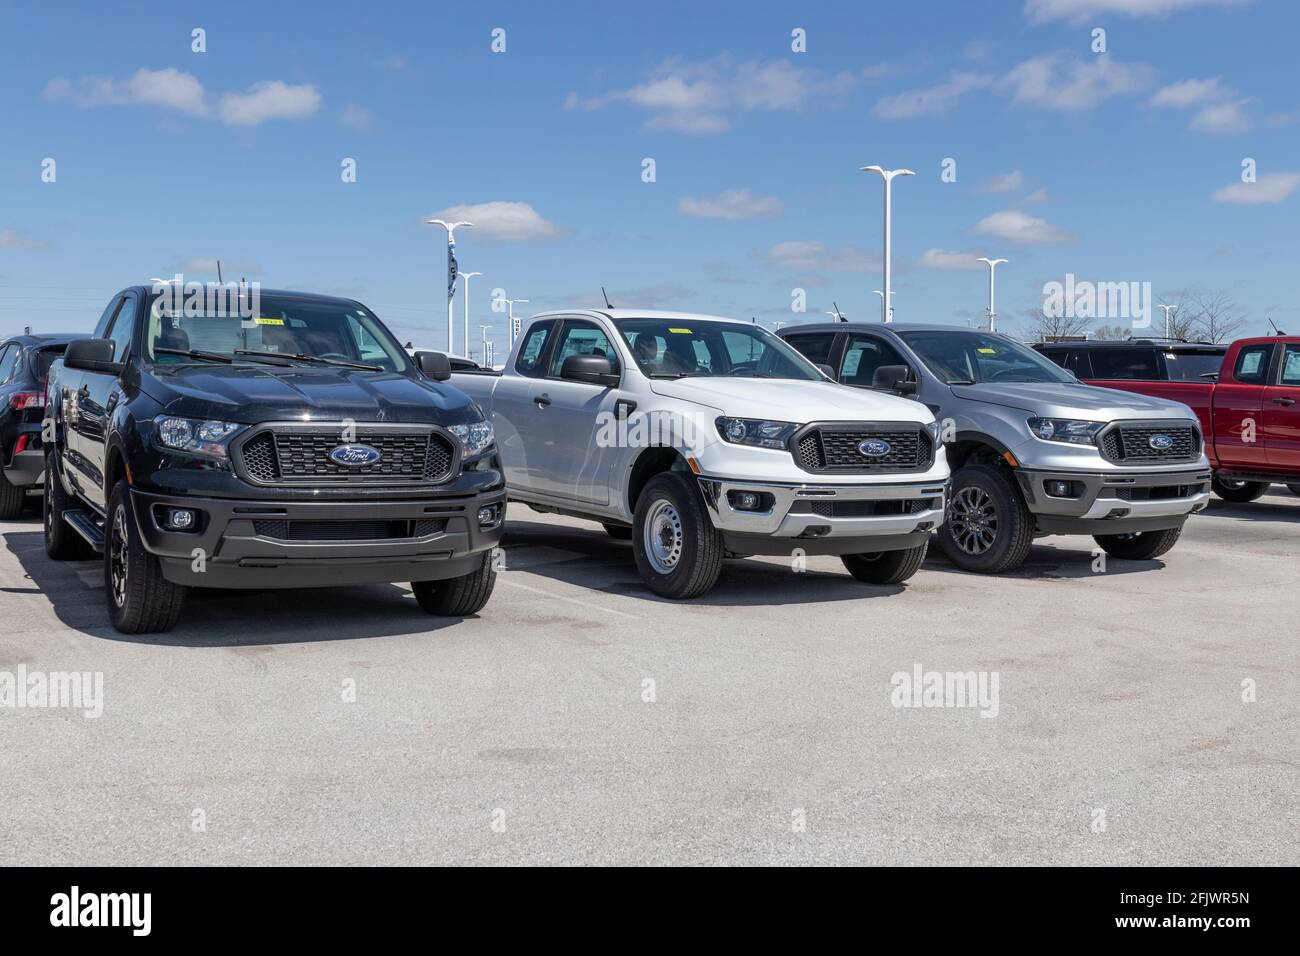 Plainfield - Circa April 2021: Ford Ranger pickup truck display at a dealership. The Ranger nameplate has been used on multiple light duty truck model Stock Photo